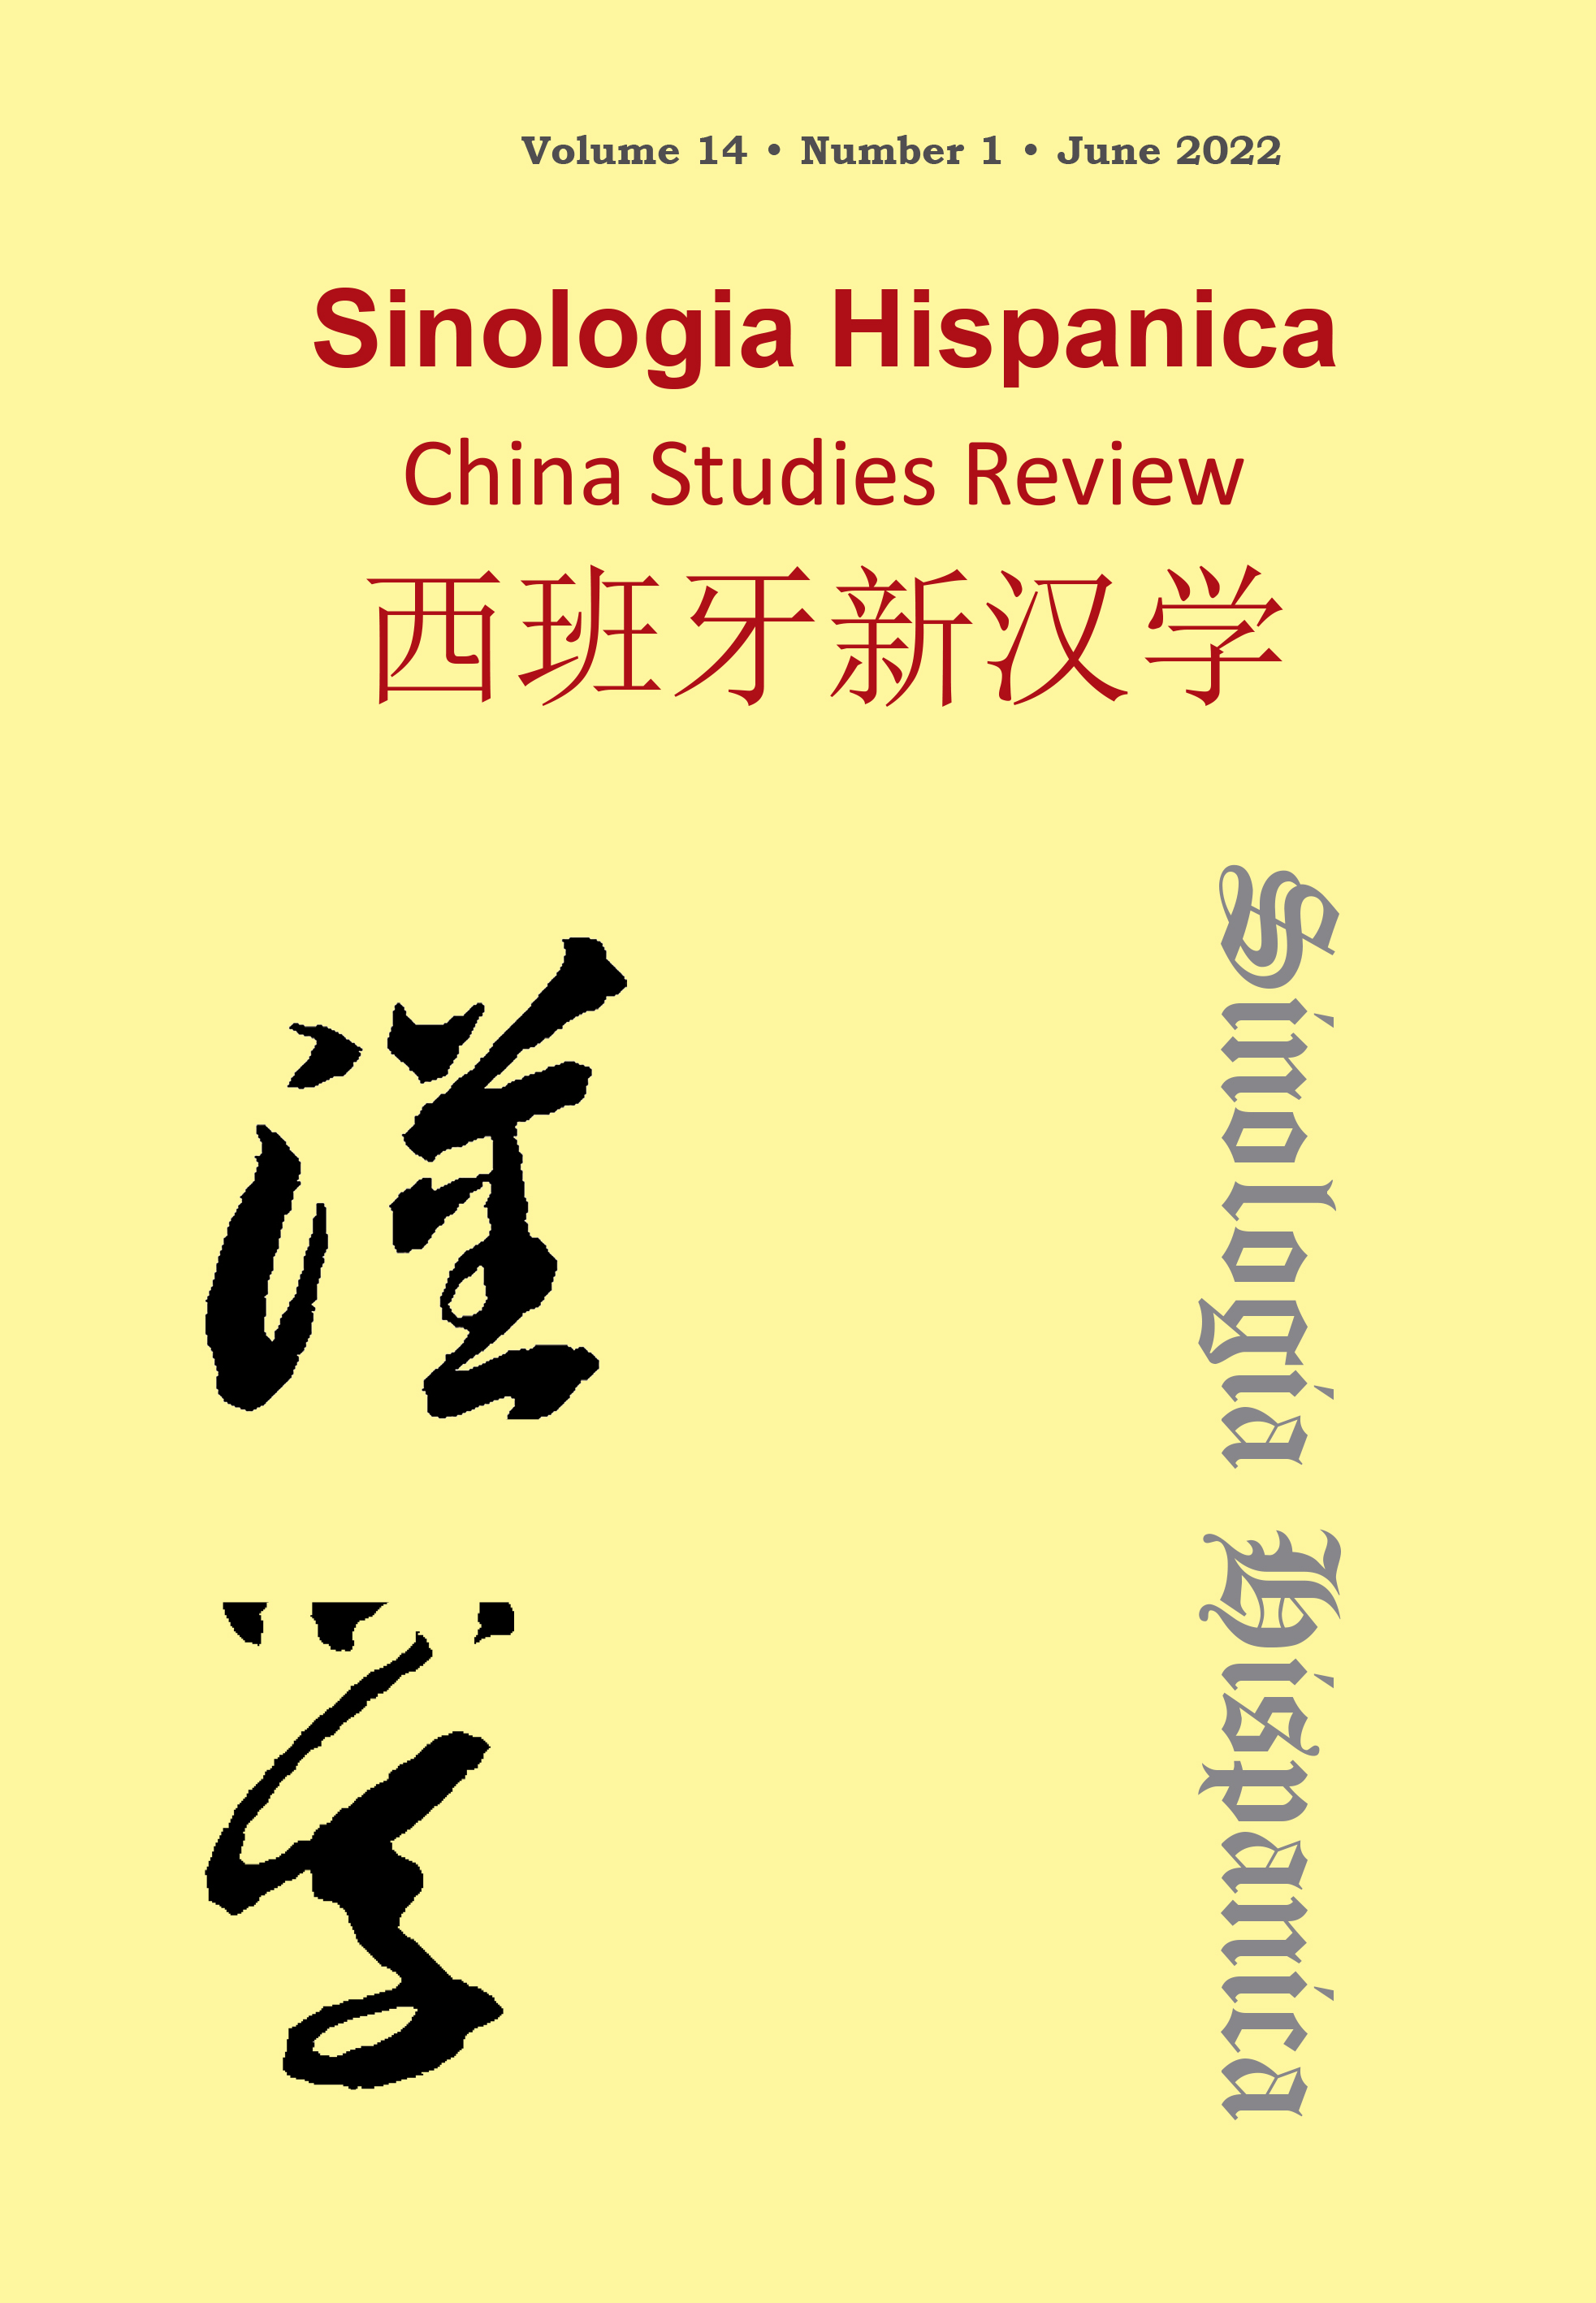 Acquisition of Chinese Conceptual Metaphor from the Perspective of Cognitive Linguistics